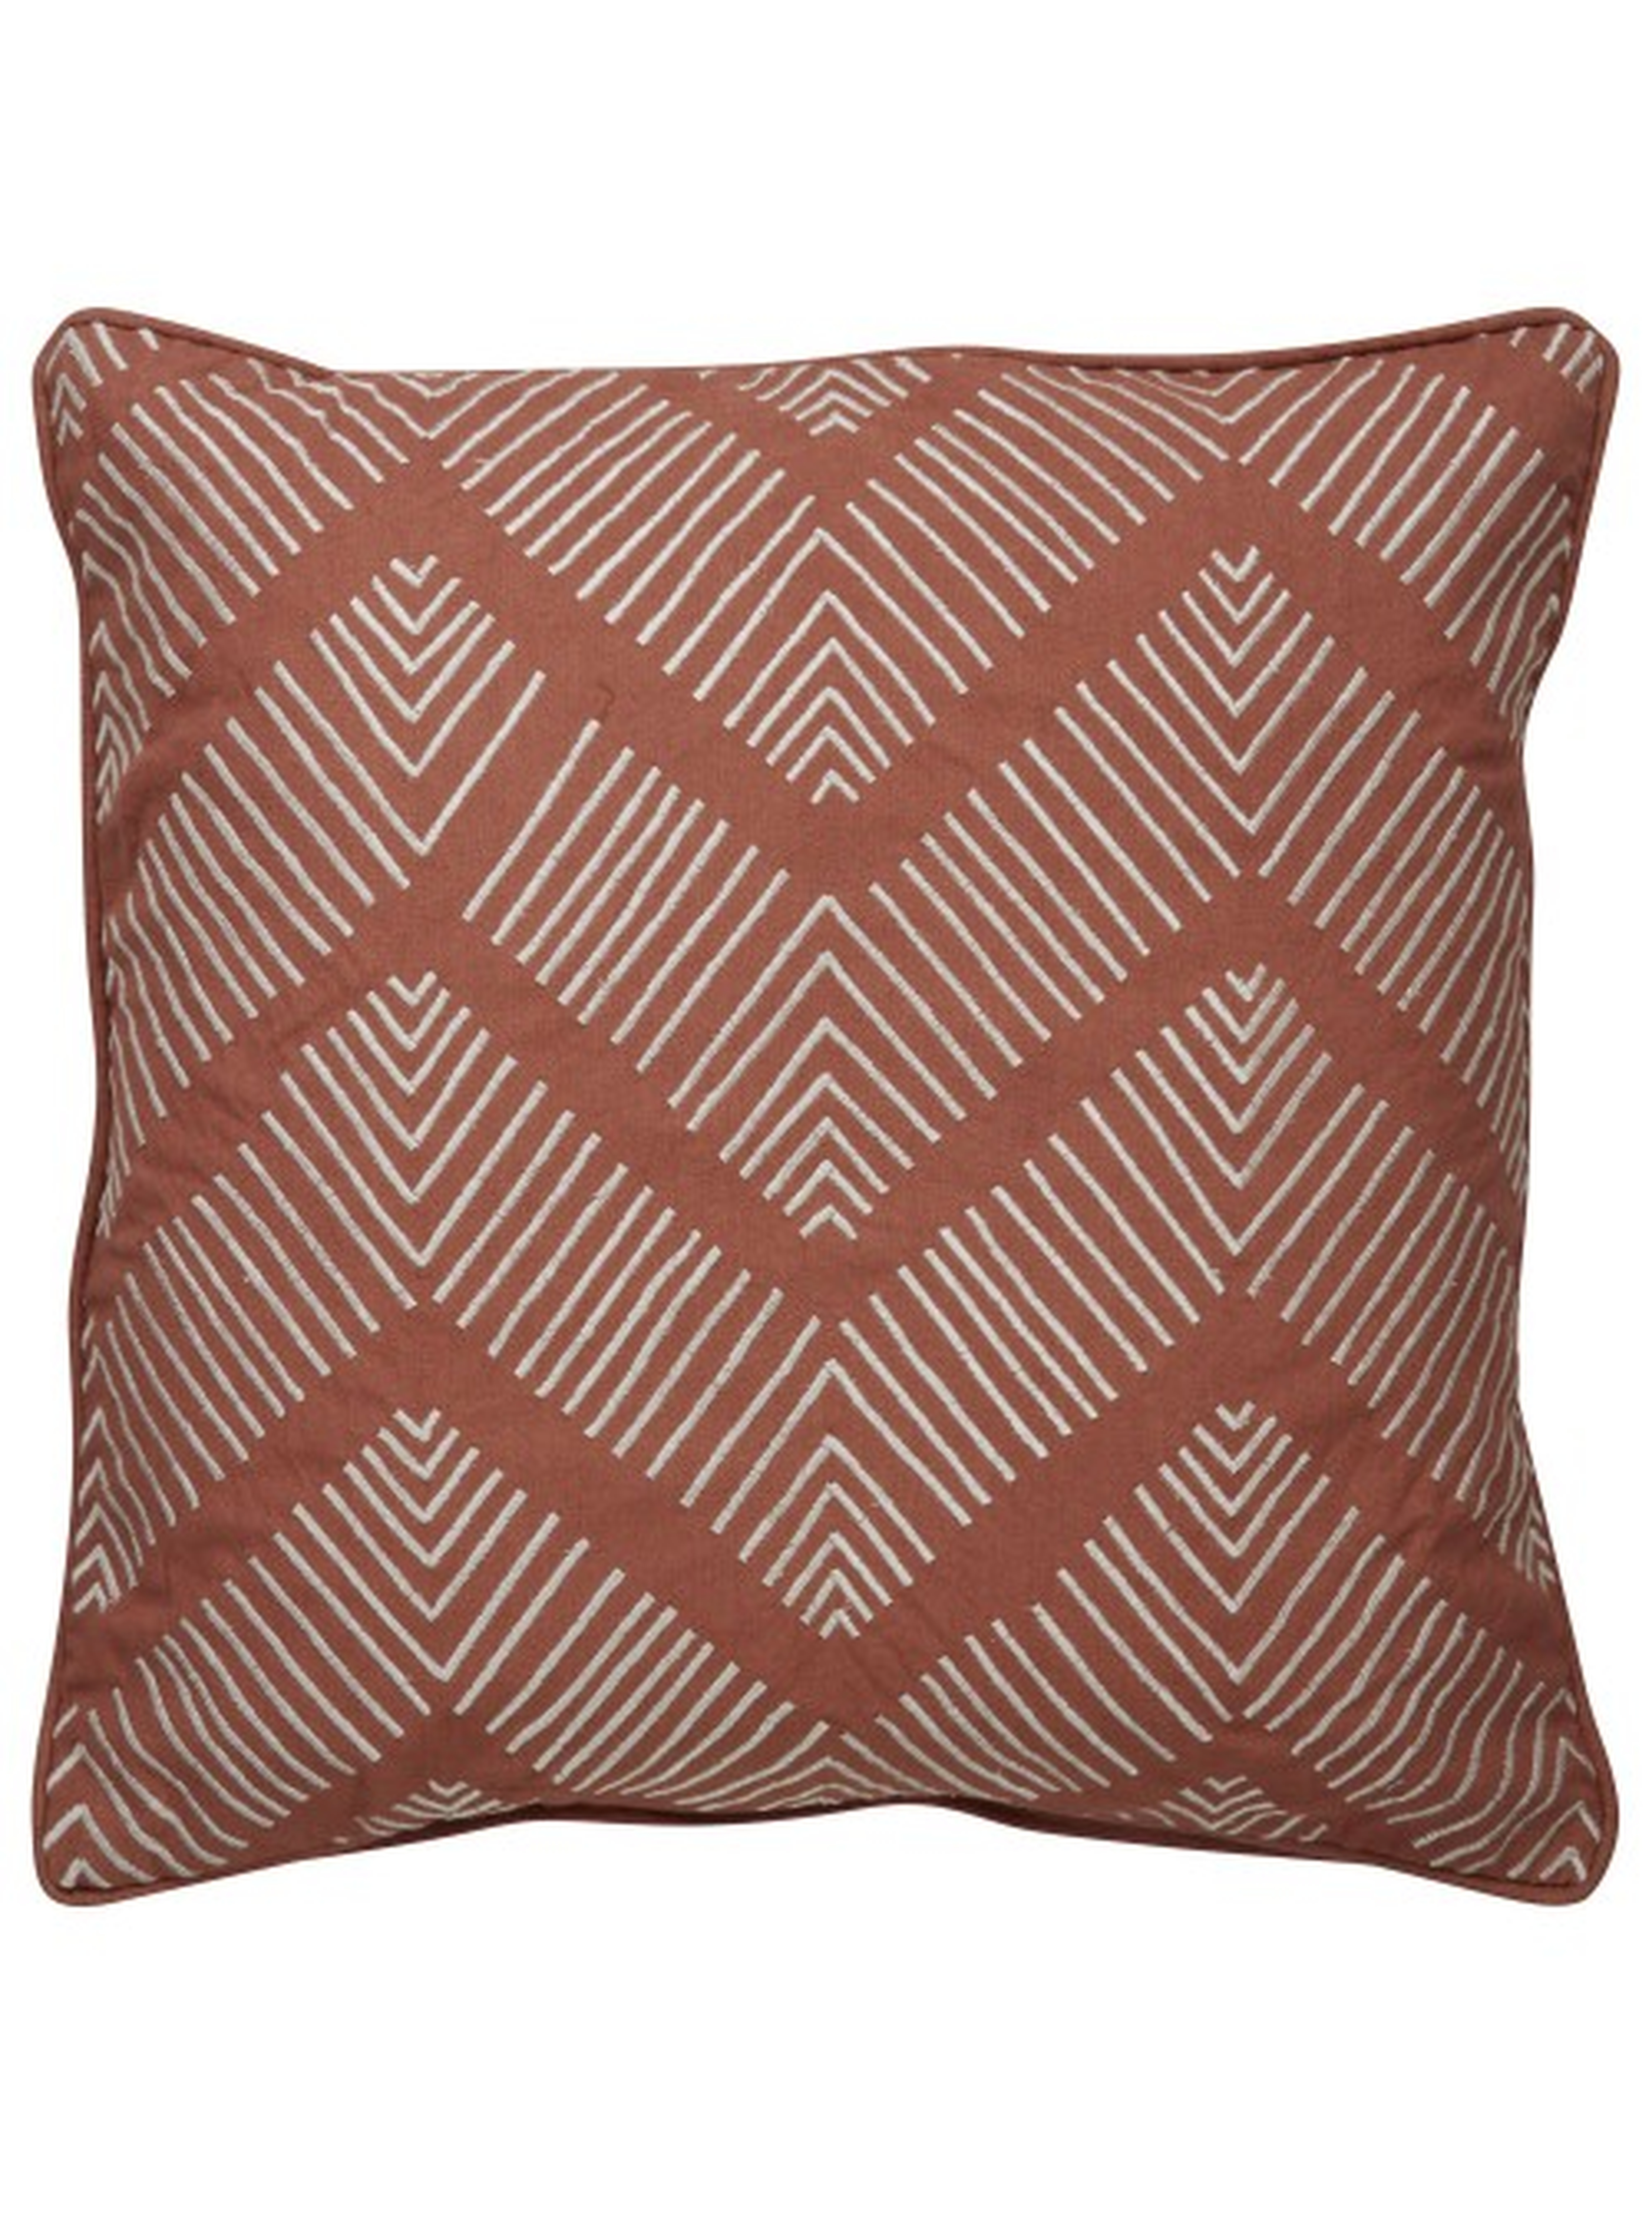 KASIA PILLOW, TERRACOTTA - 18" x 18" - Polyester Filled - Lulu and Georgia